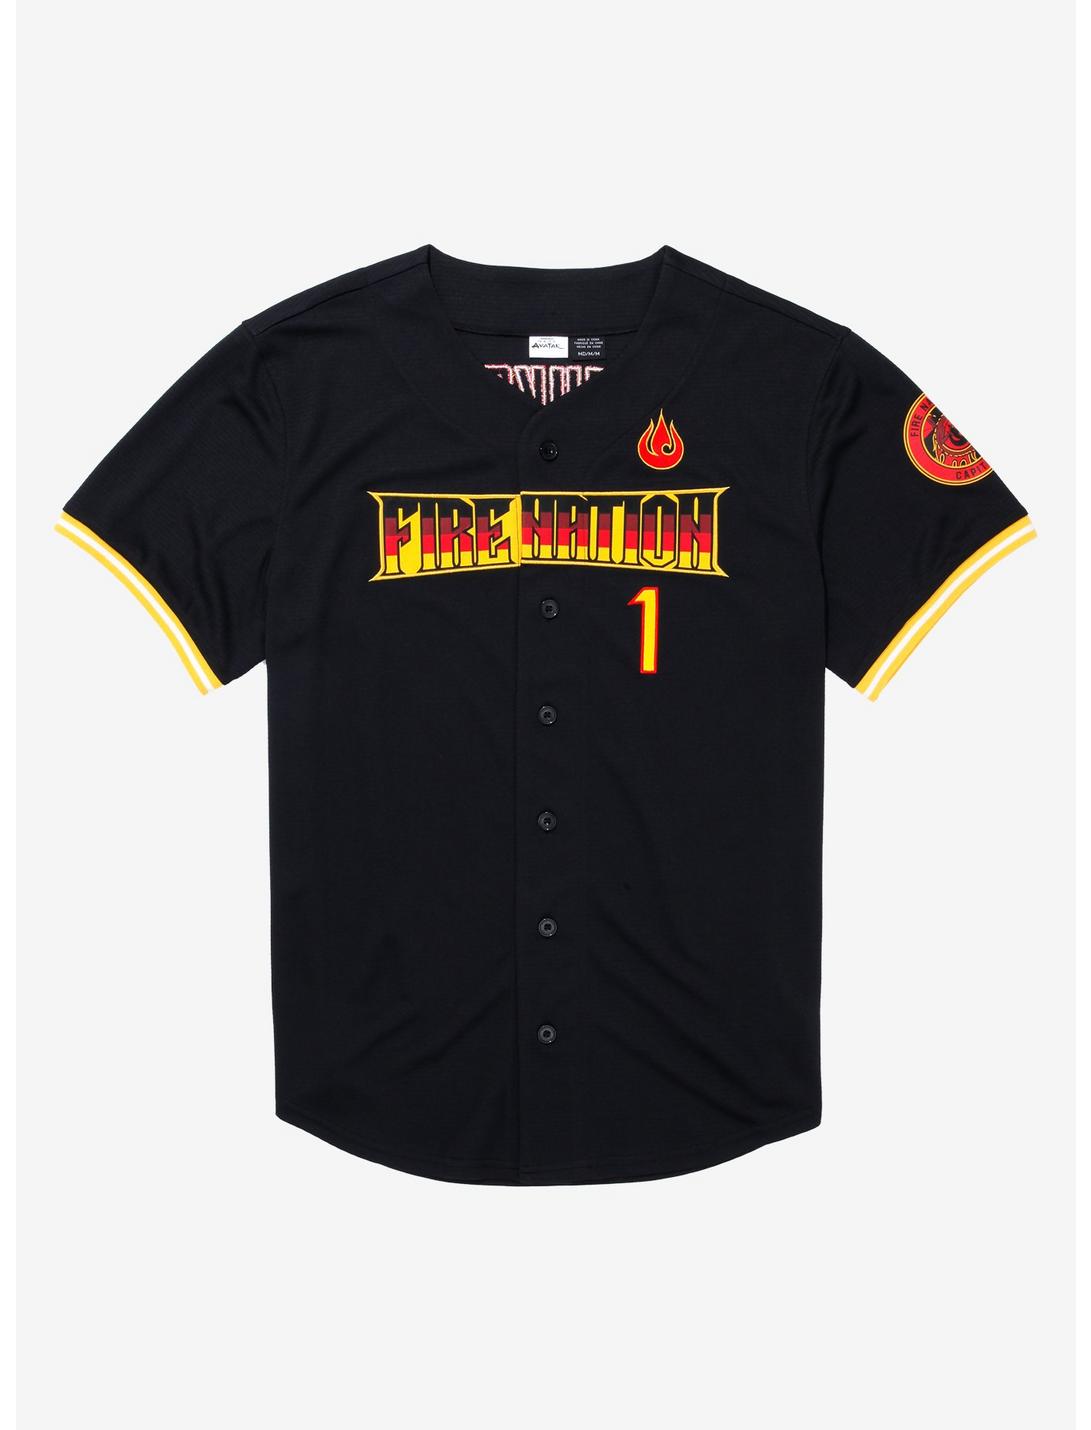 Avatar: The Last Airbender Fire Nation Baseball Jersey - BoxLunch Exclusive, BLACK, hi-res